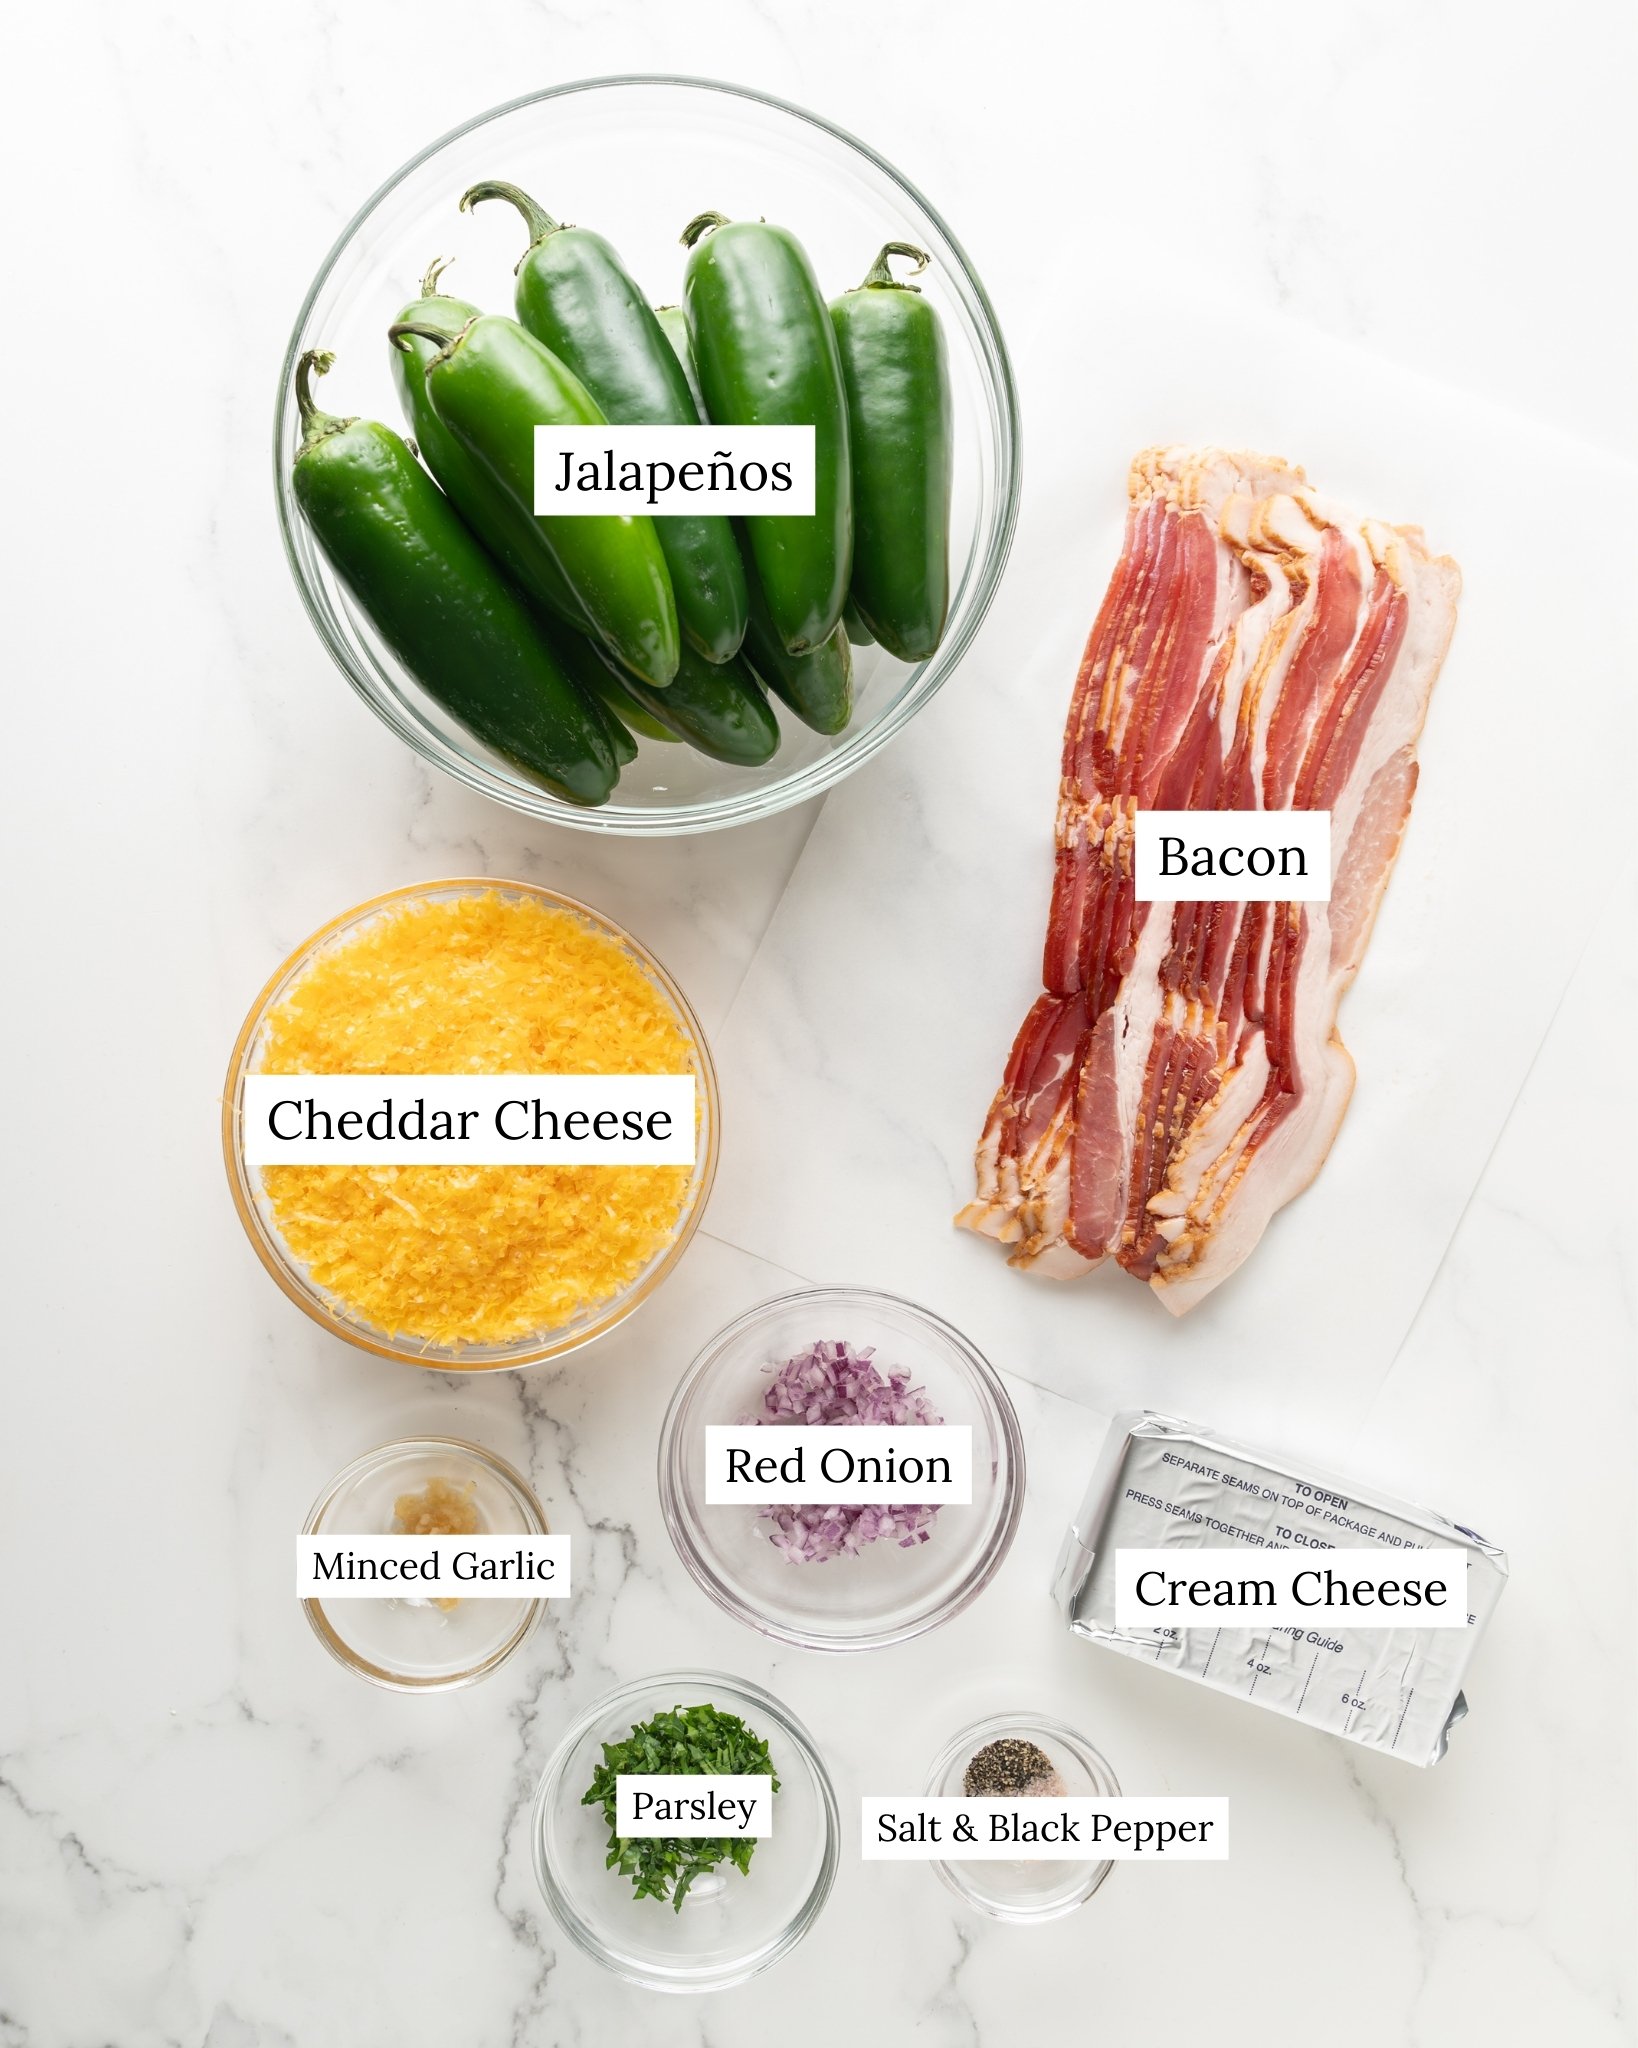 Low carb jalapeno popper ingredients. A medium sized clear bowl of fresh jalapenos, slices of bacon, grated cheese, red onion, minced garlic, minced parsley, cream cheese, salt and pepper.